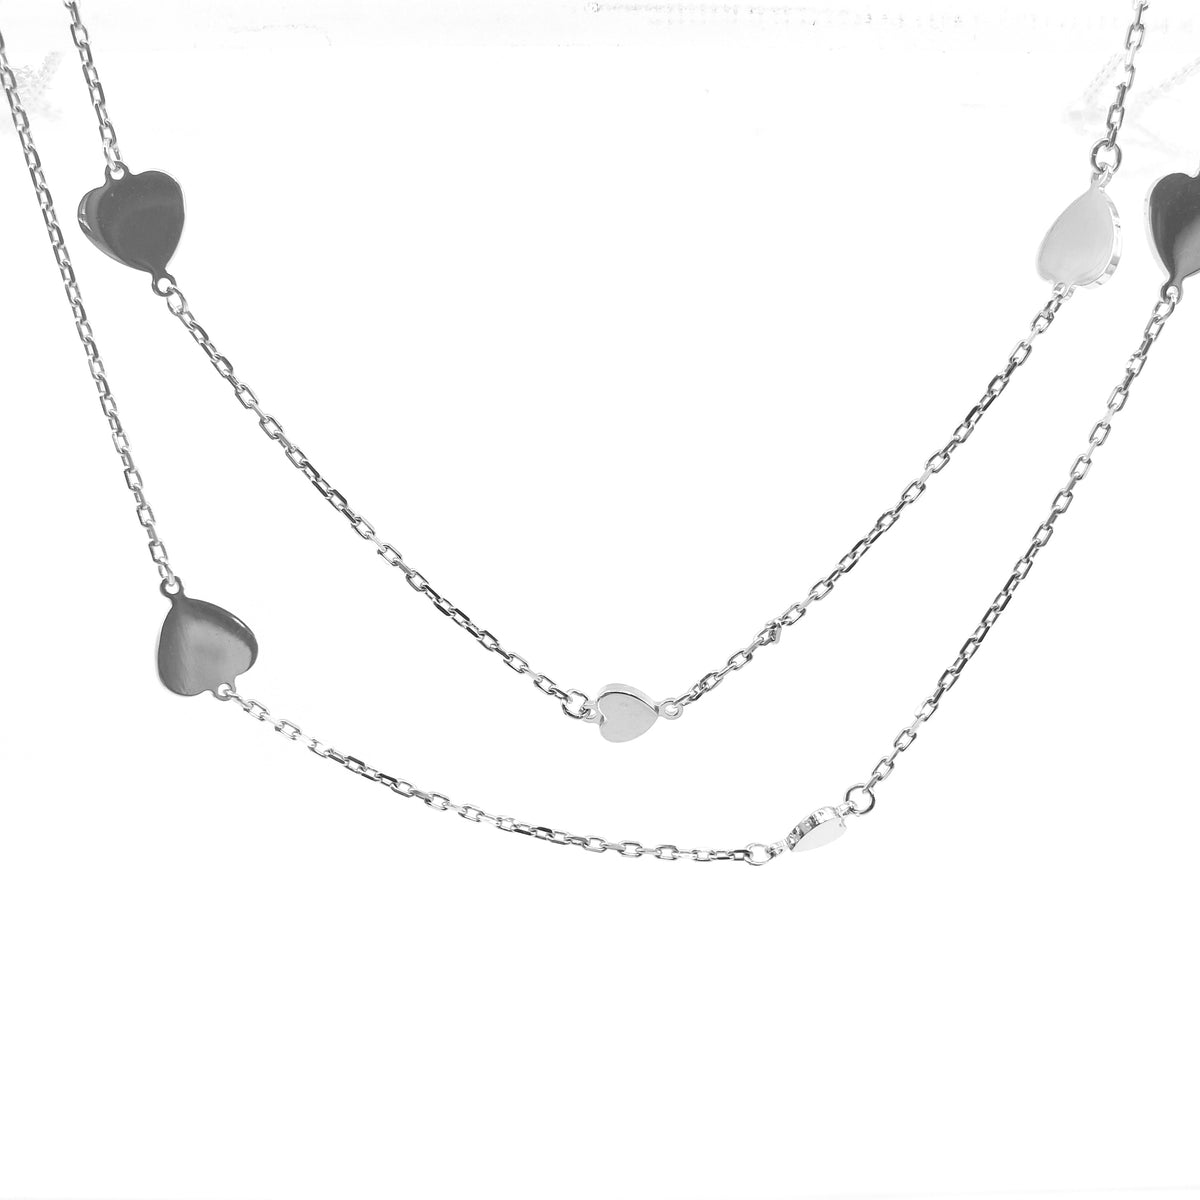 10K White Gold Hearts Double Link Anklet with 0.5 Inch Adjuster - 10 Inches